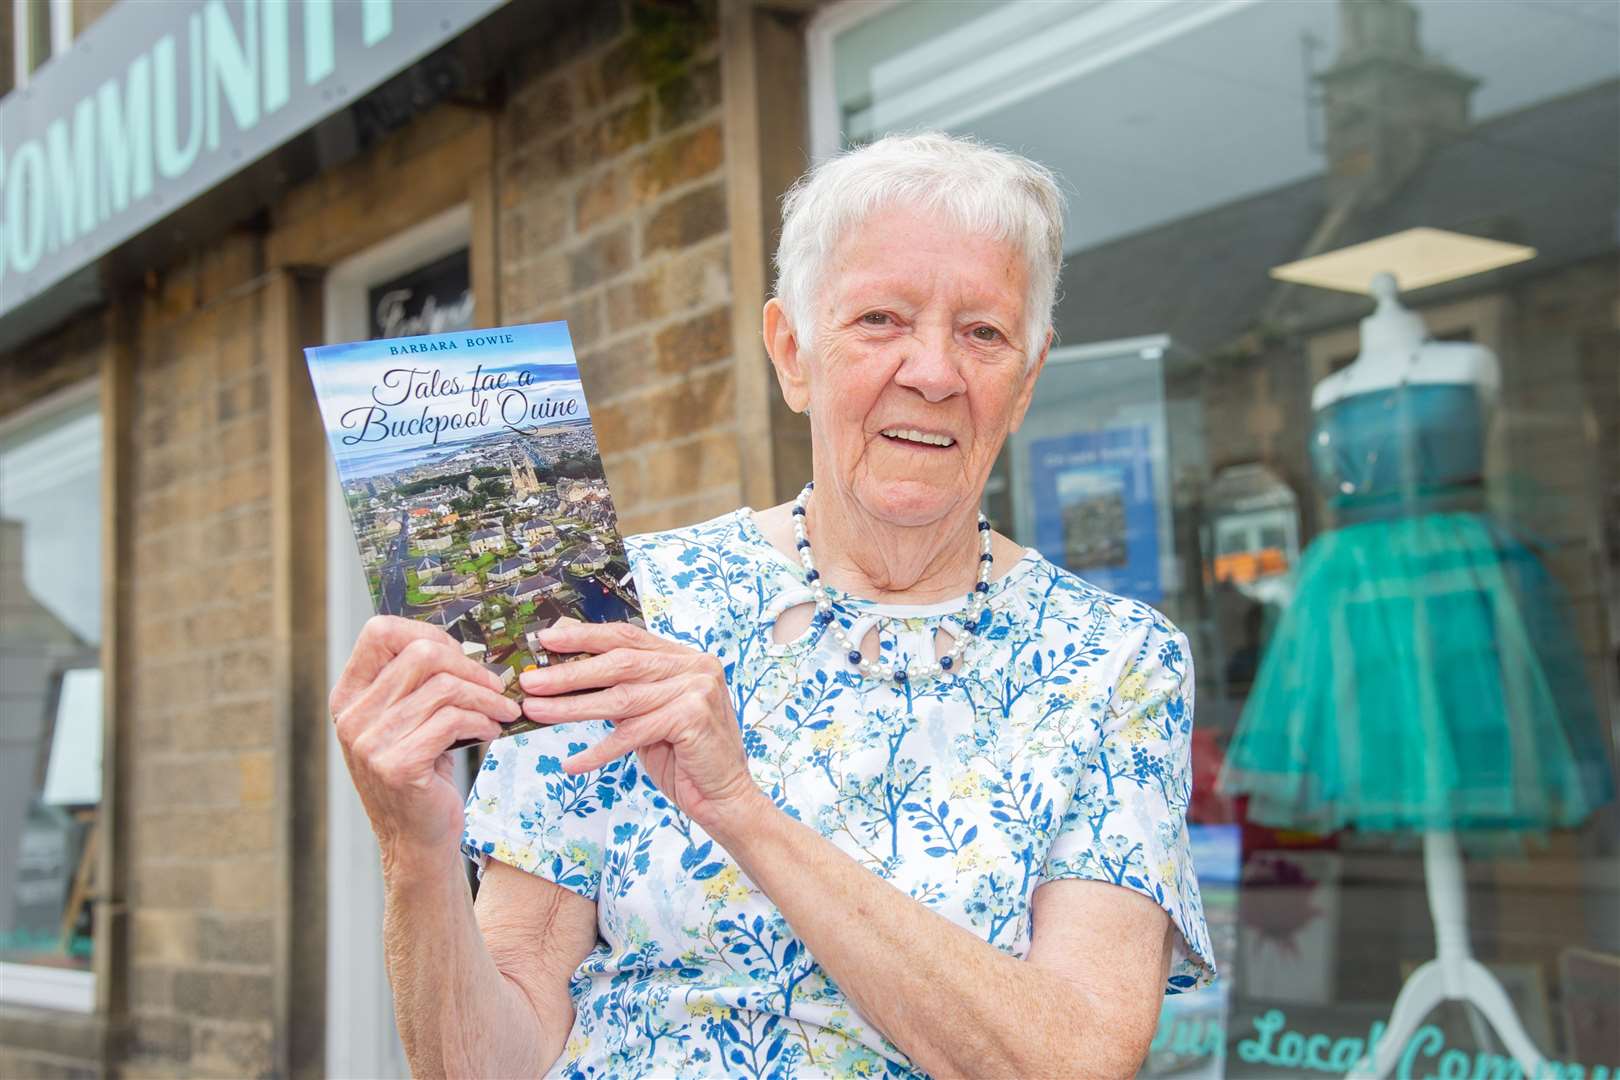 Barbara Bowie with a copy of her debut book Tales fae a Buckpool Quine. Picture: Daniel Forsyth